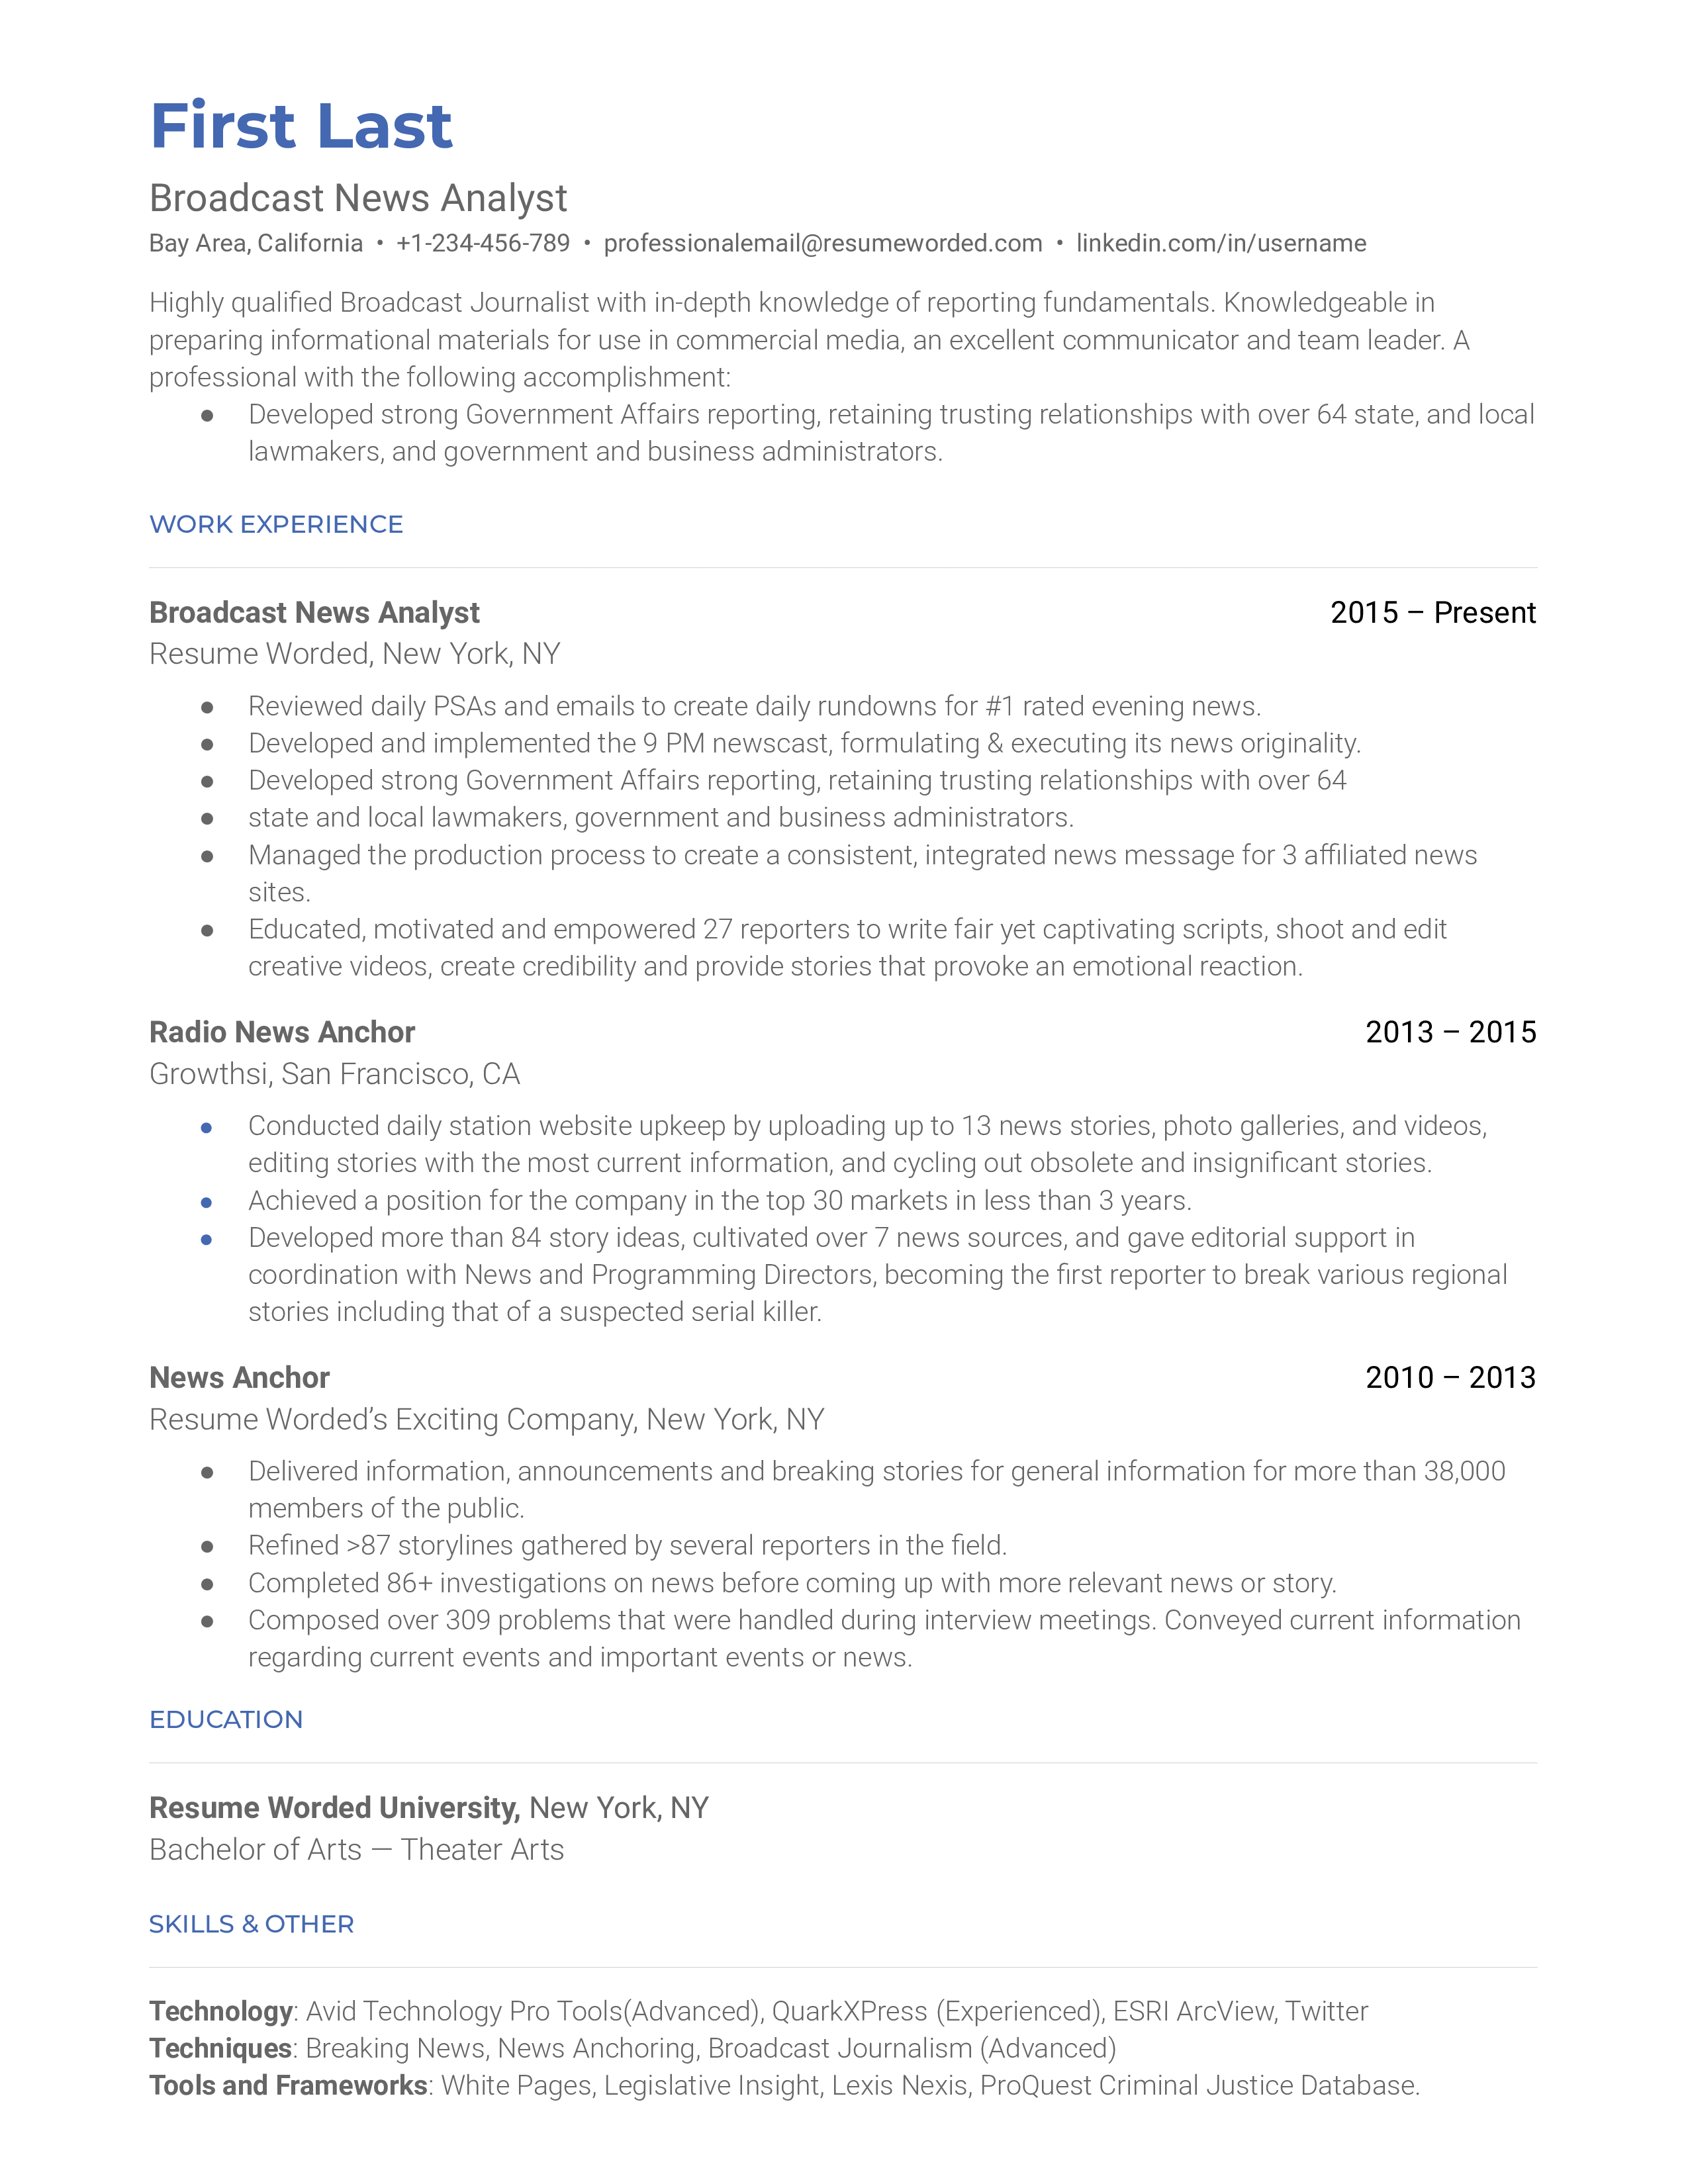 Broadcast news analyst resume sample that highlights an applicant's quantifiable successes and their relevant experience